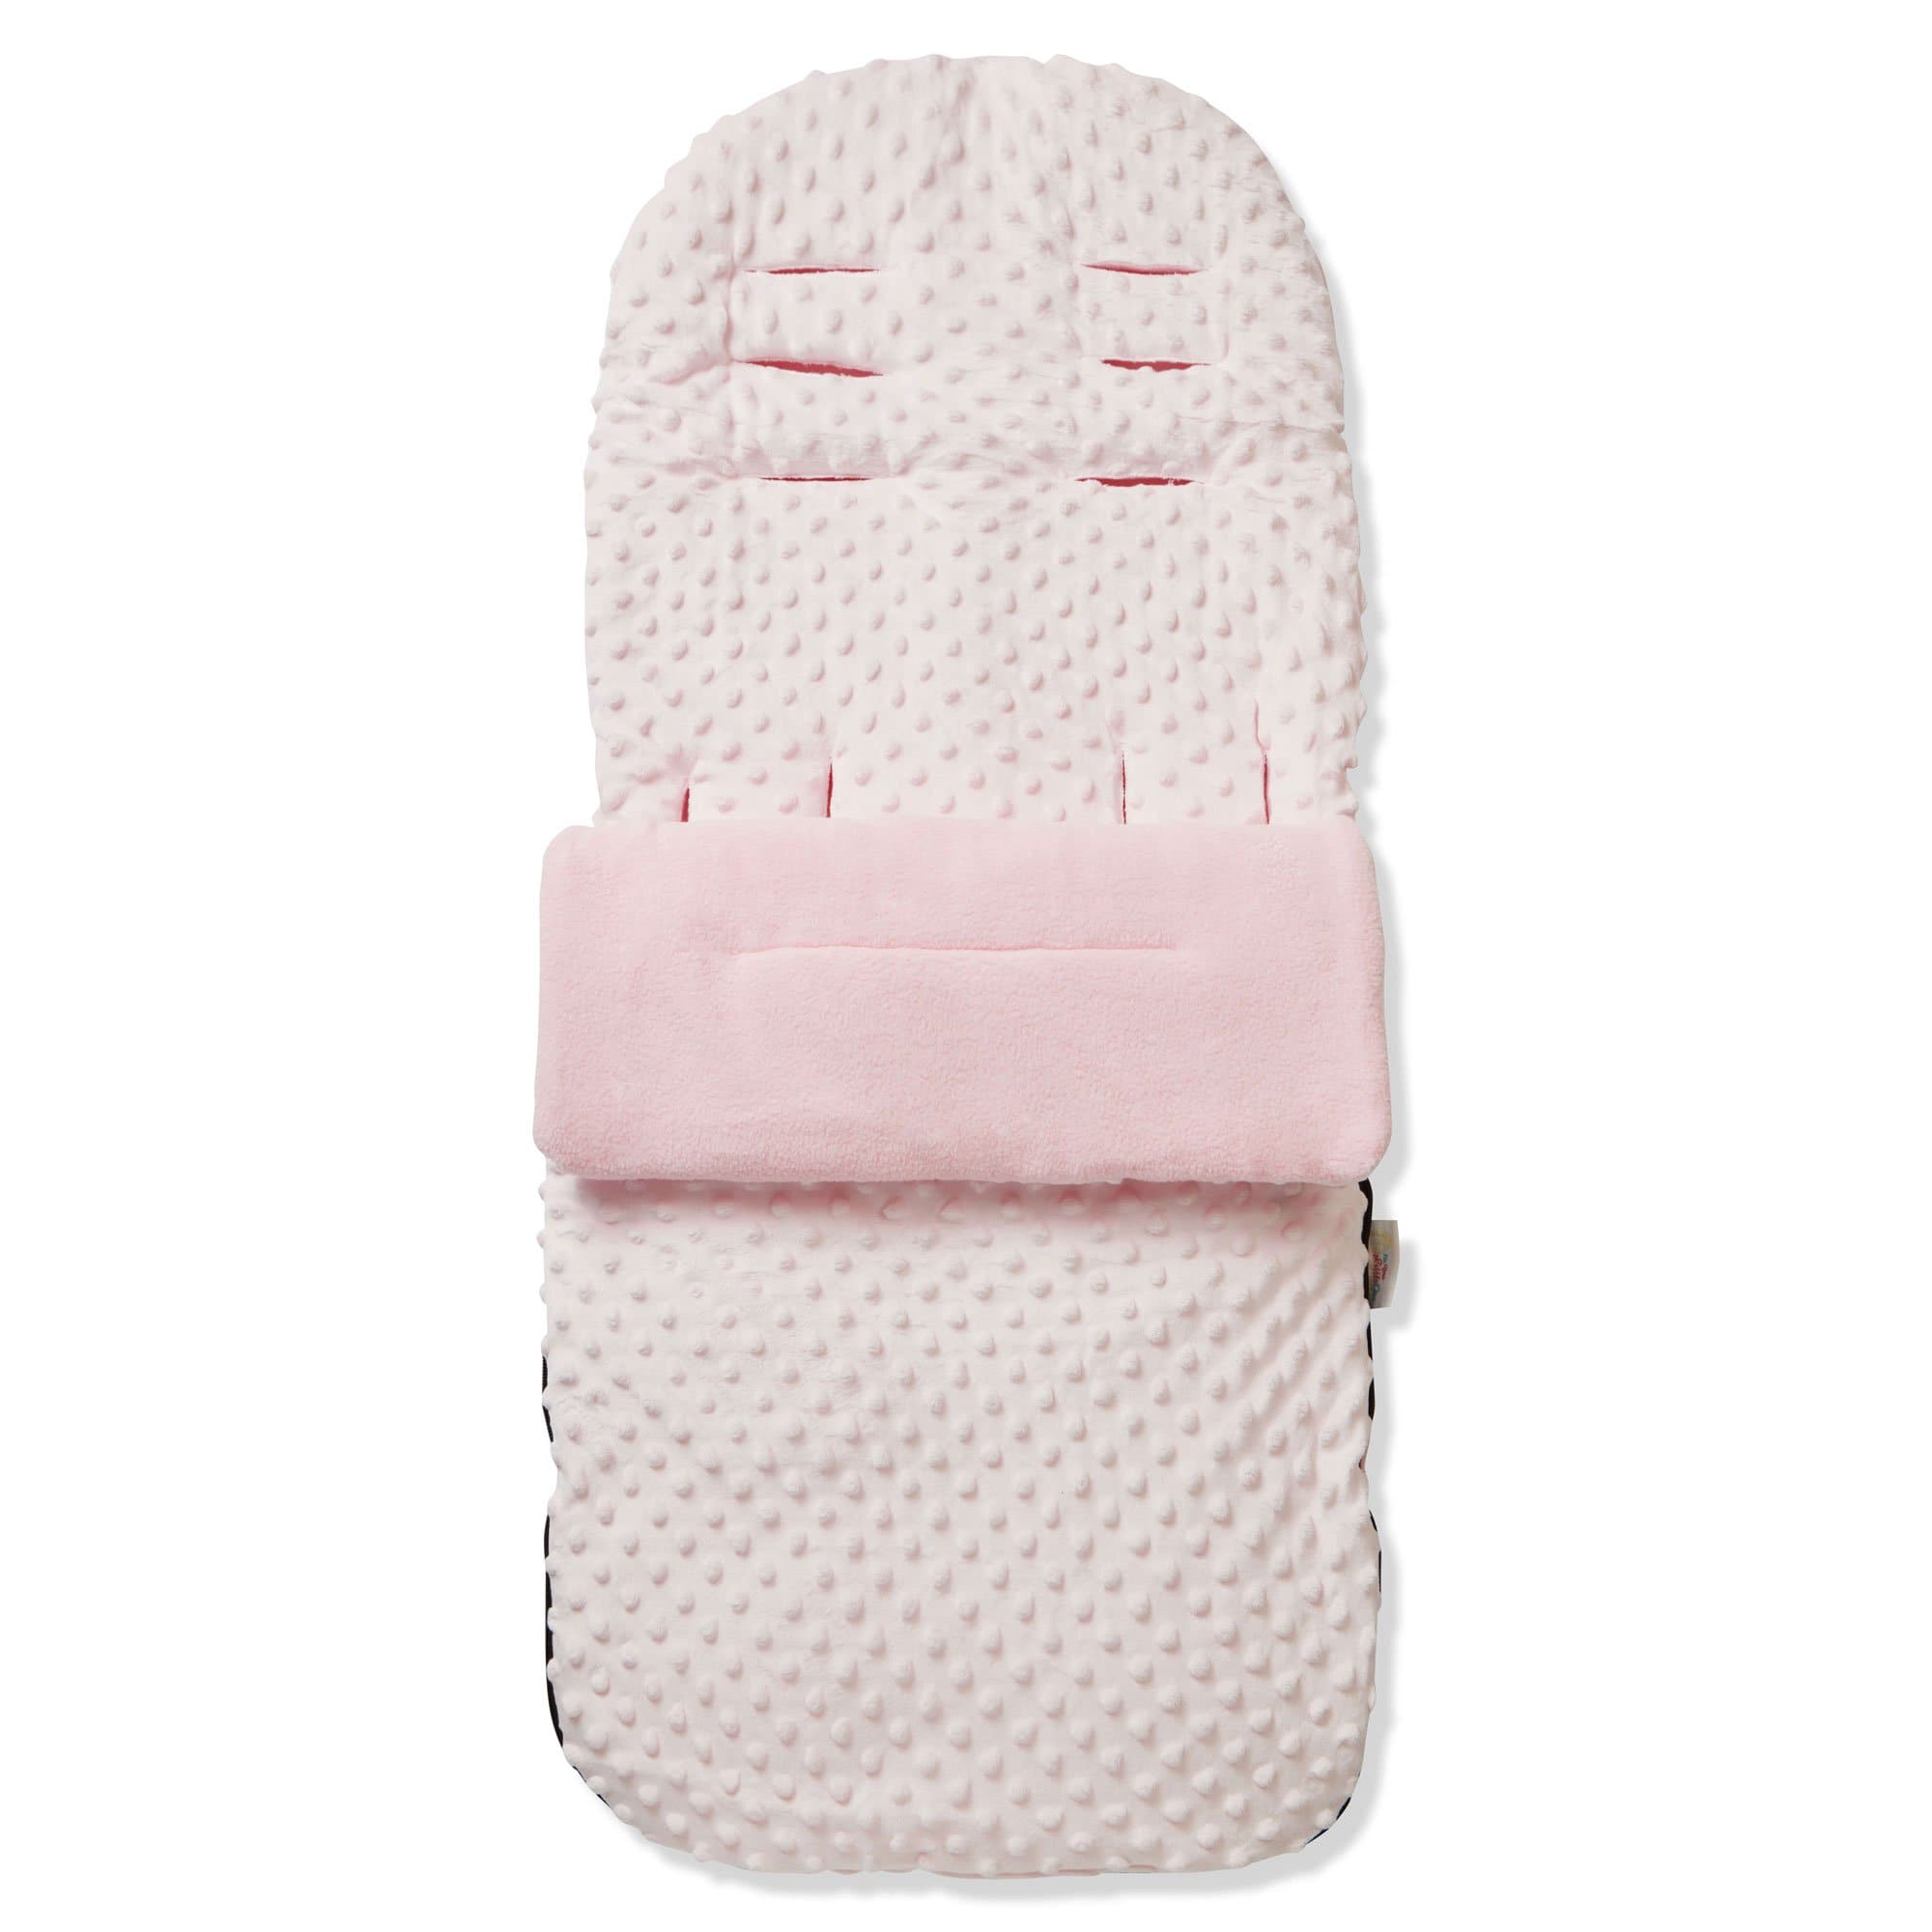 Dimple Footmuff / Cosy Toes Compatible with Pericles - Pink / Fits All Models | For Your Little One